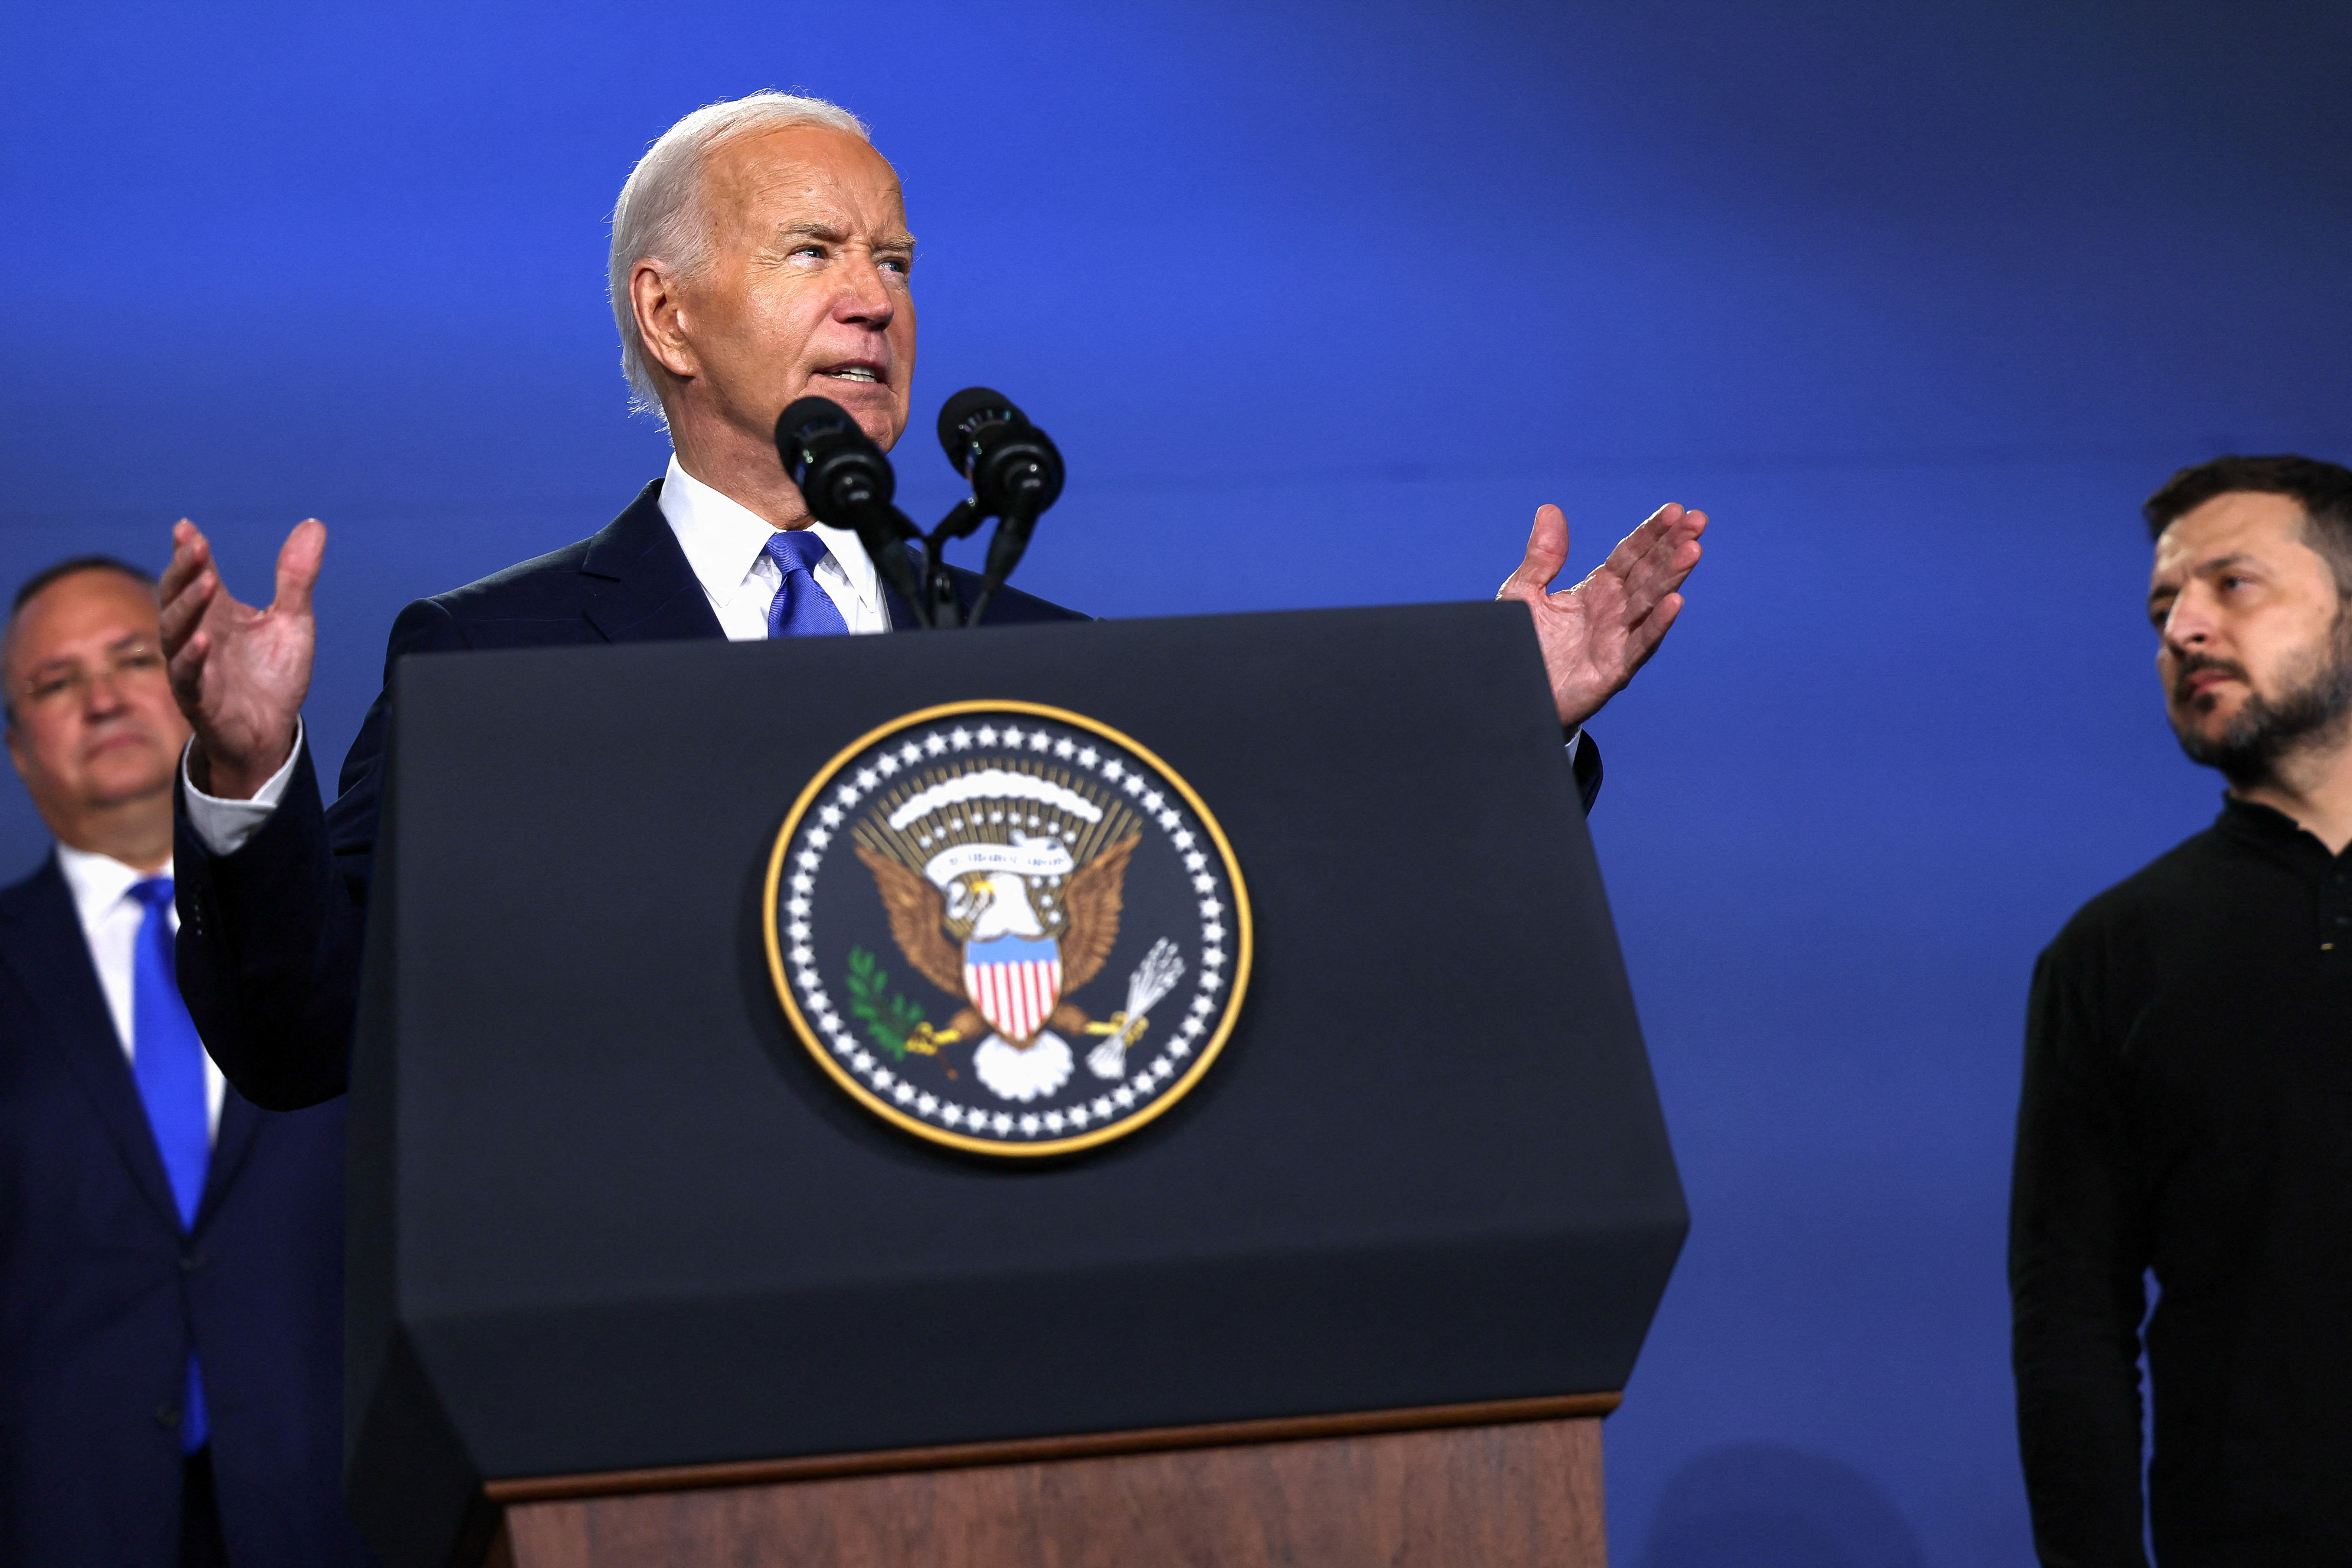 Biden speaks at a podium with a US seal.